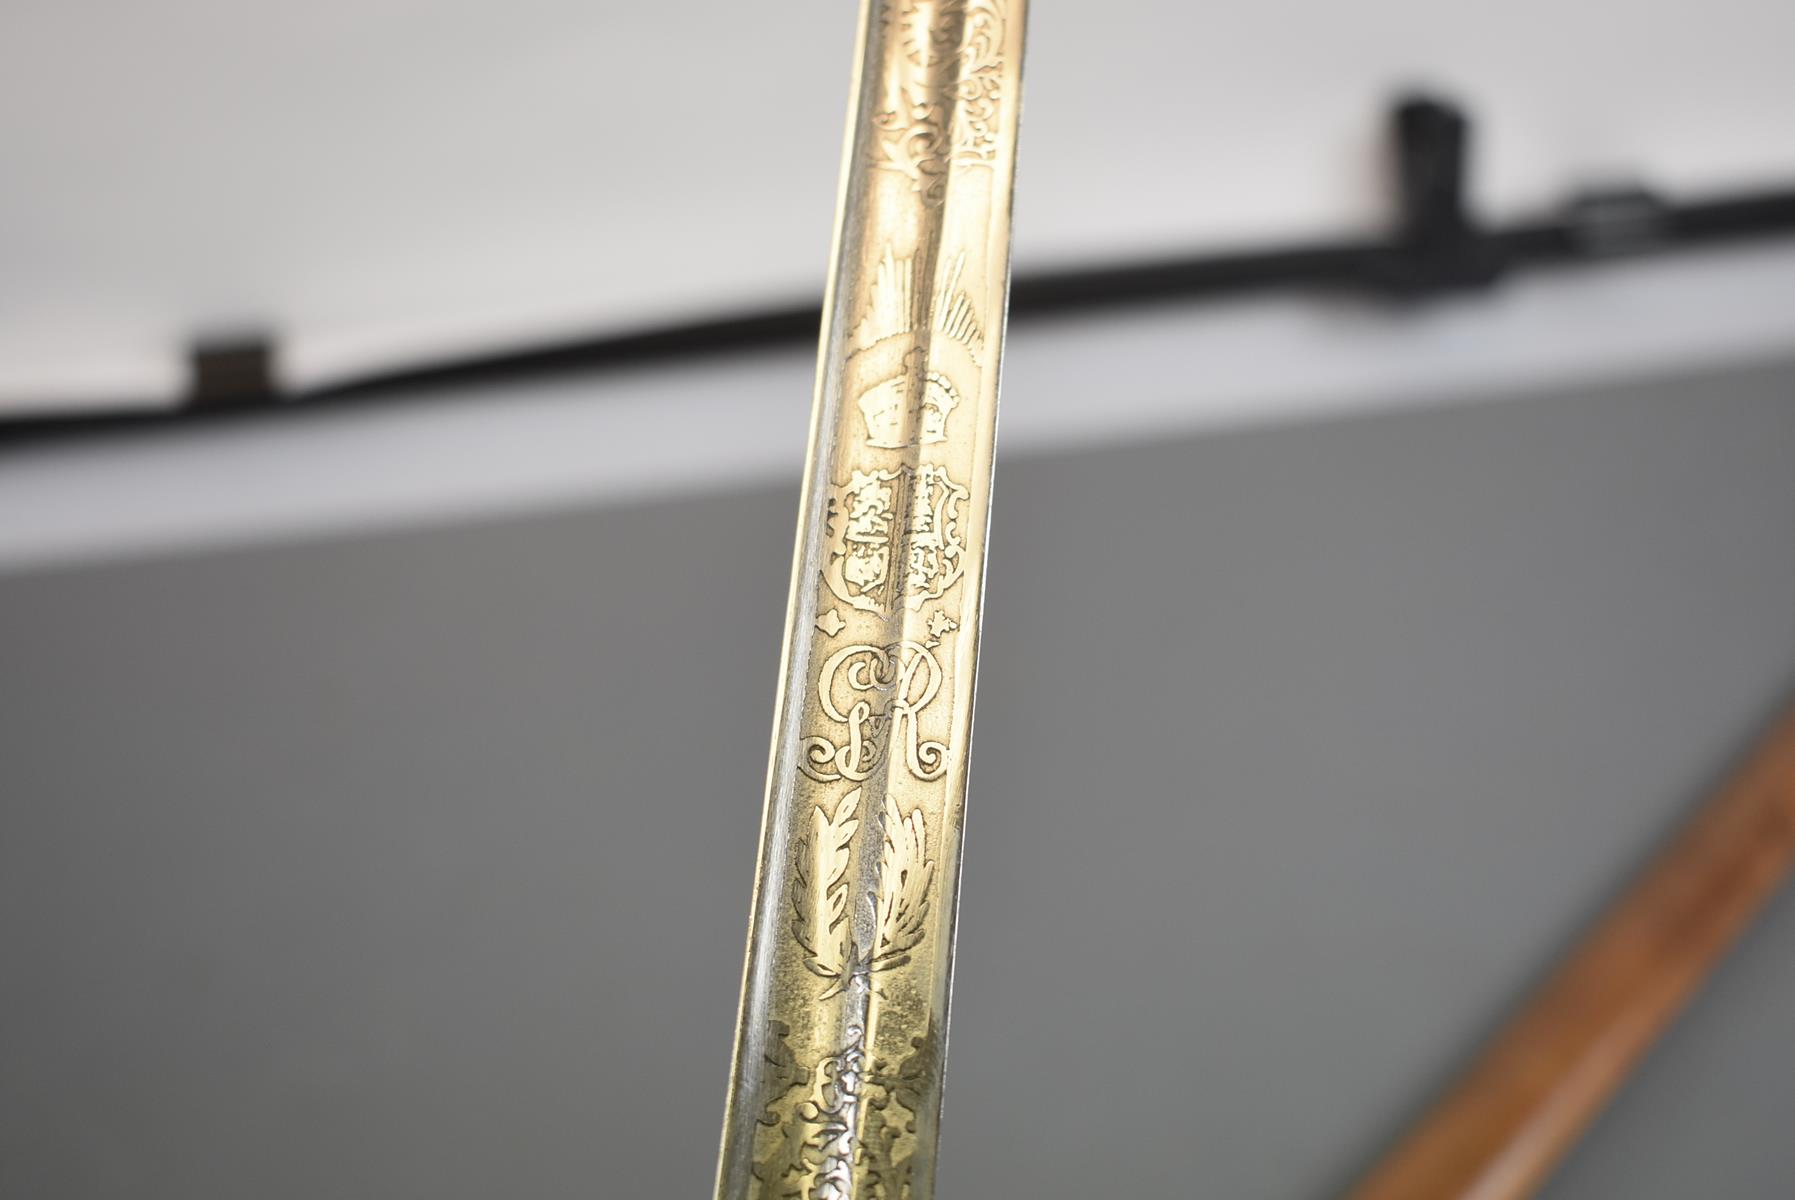 AN INDIAN 1912 PATTERN CAVALRY OFFICER'S SWORD, 89.5cm blade poorly etched with scrolling foliage - Image 5 of 11